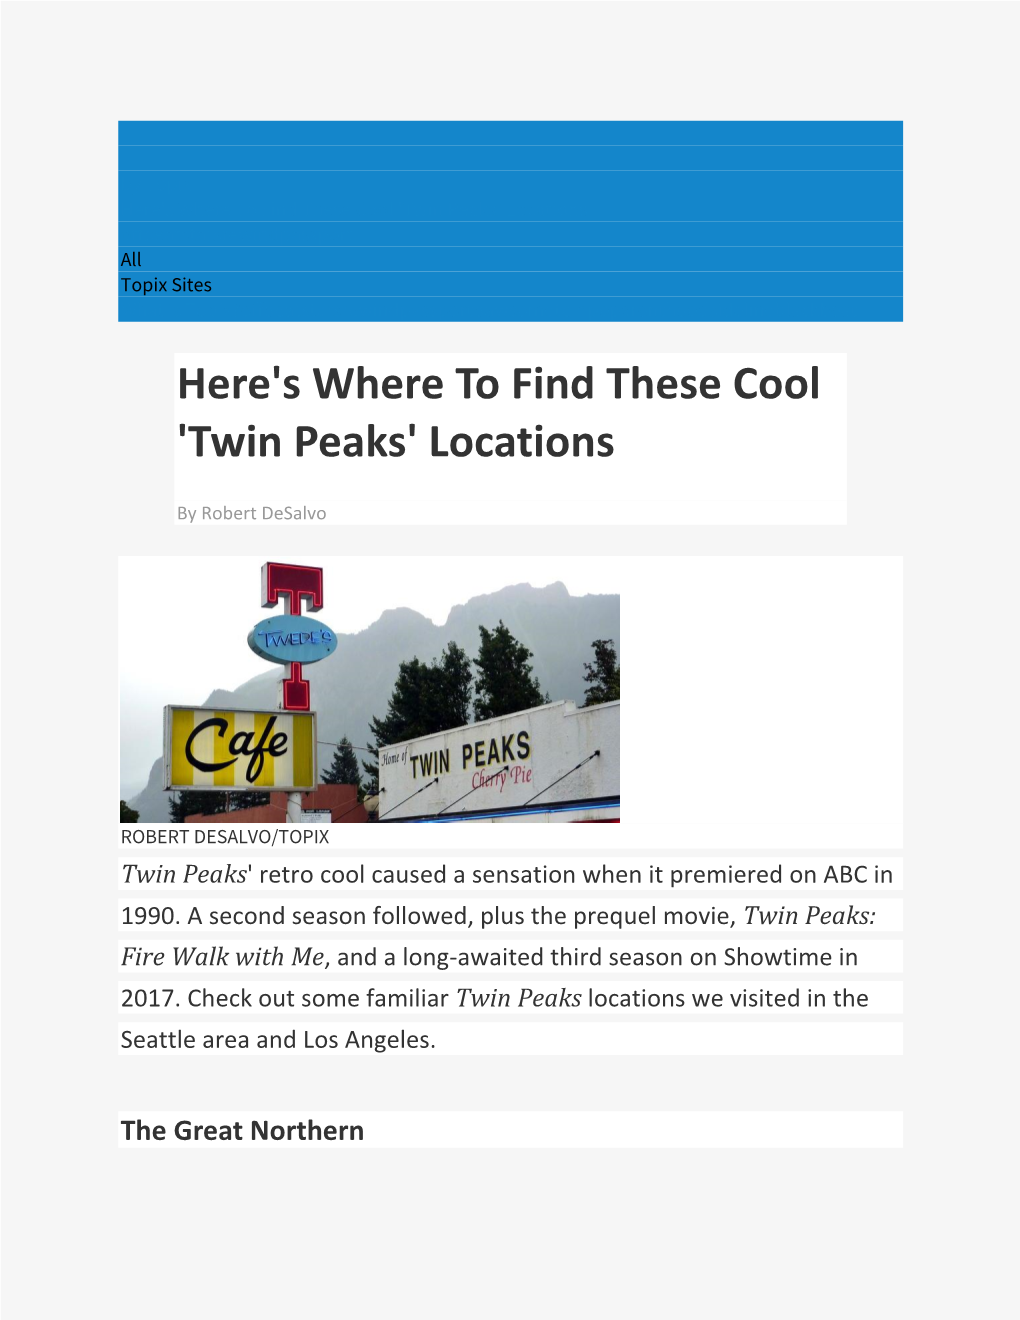 Here's Where to Find These Cool 'Twin Peaks' Locations